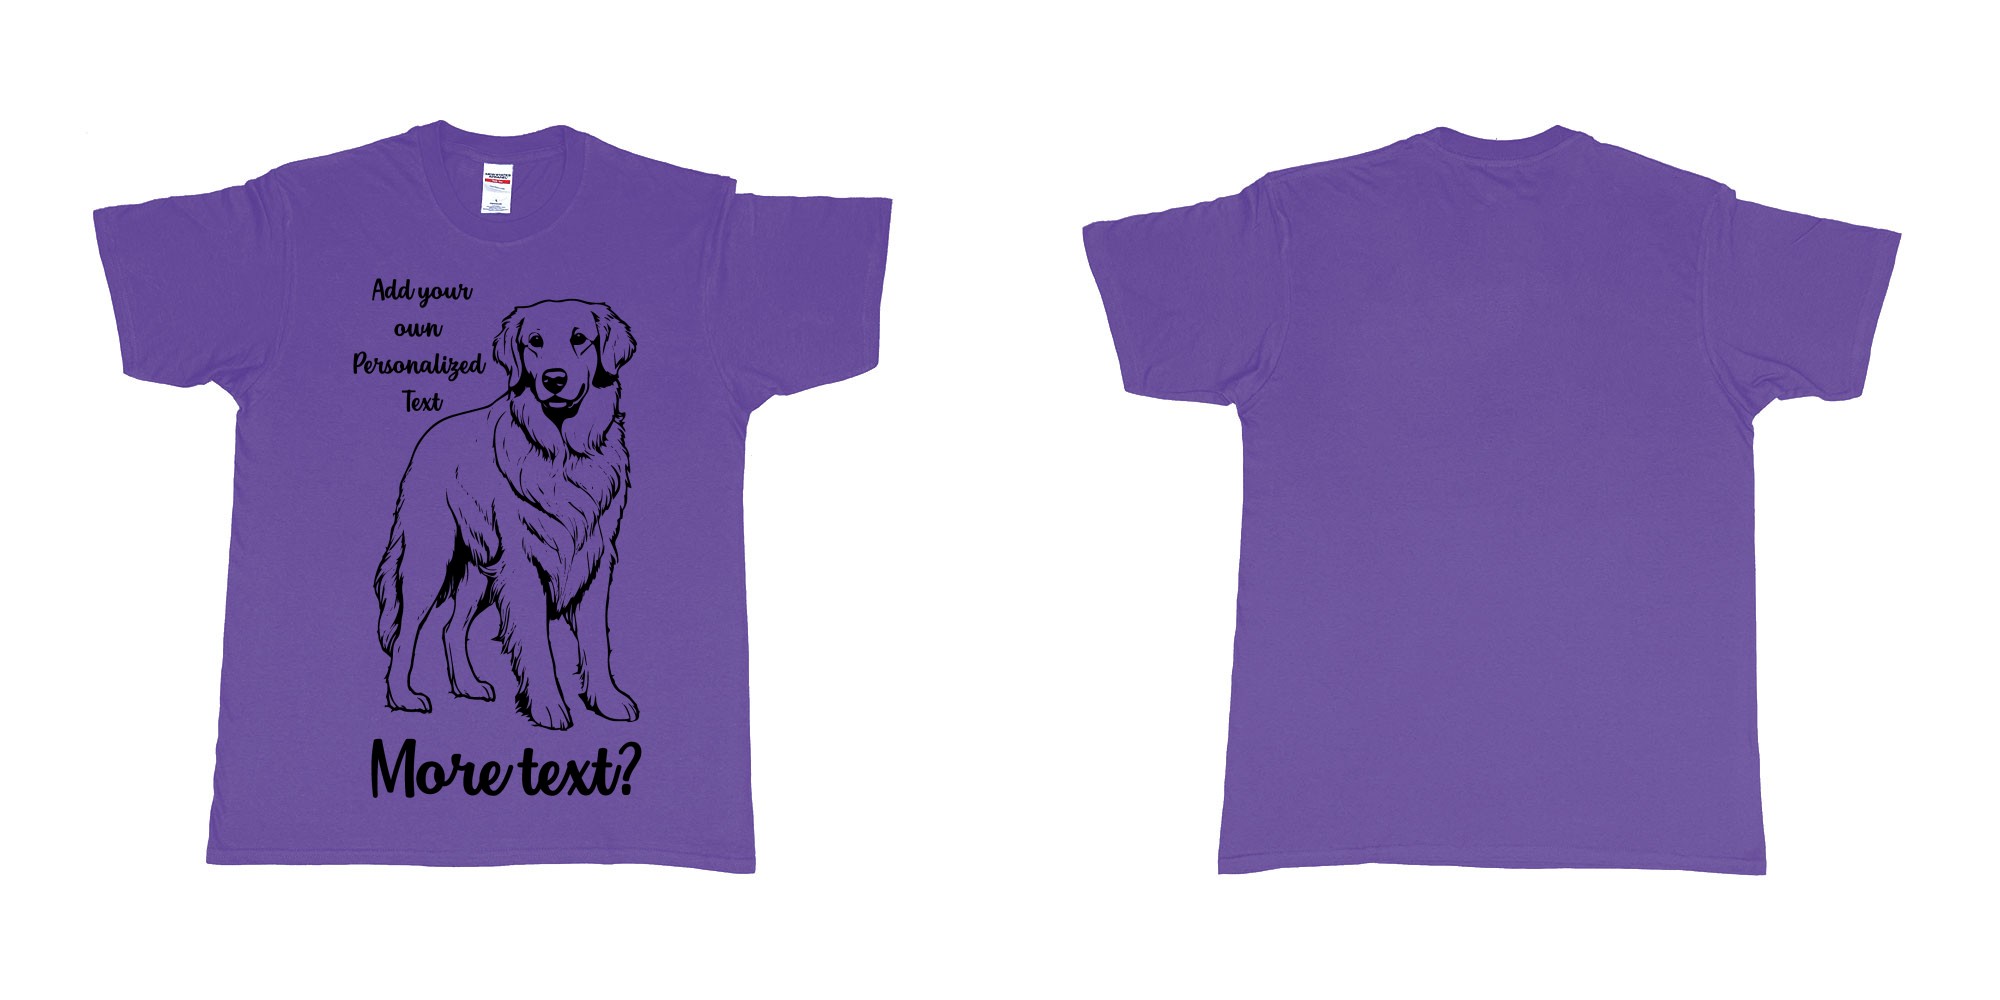 Custom tshirt design golden retriever dog breed personalized text in fabric color purple choice your own text made in Bali by The Pirate Way